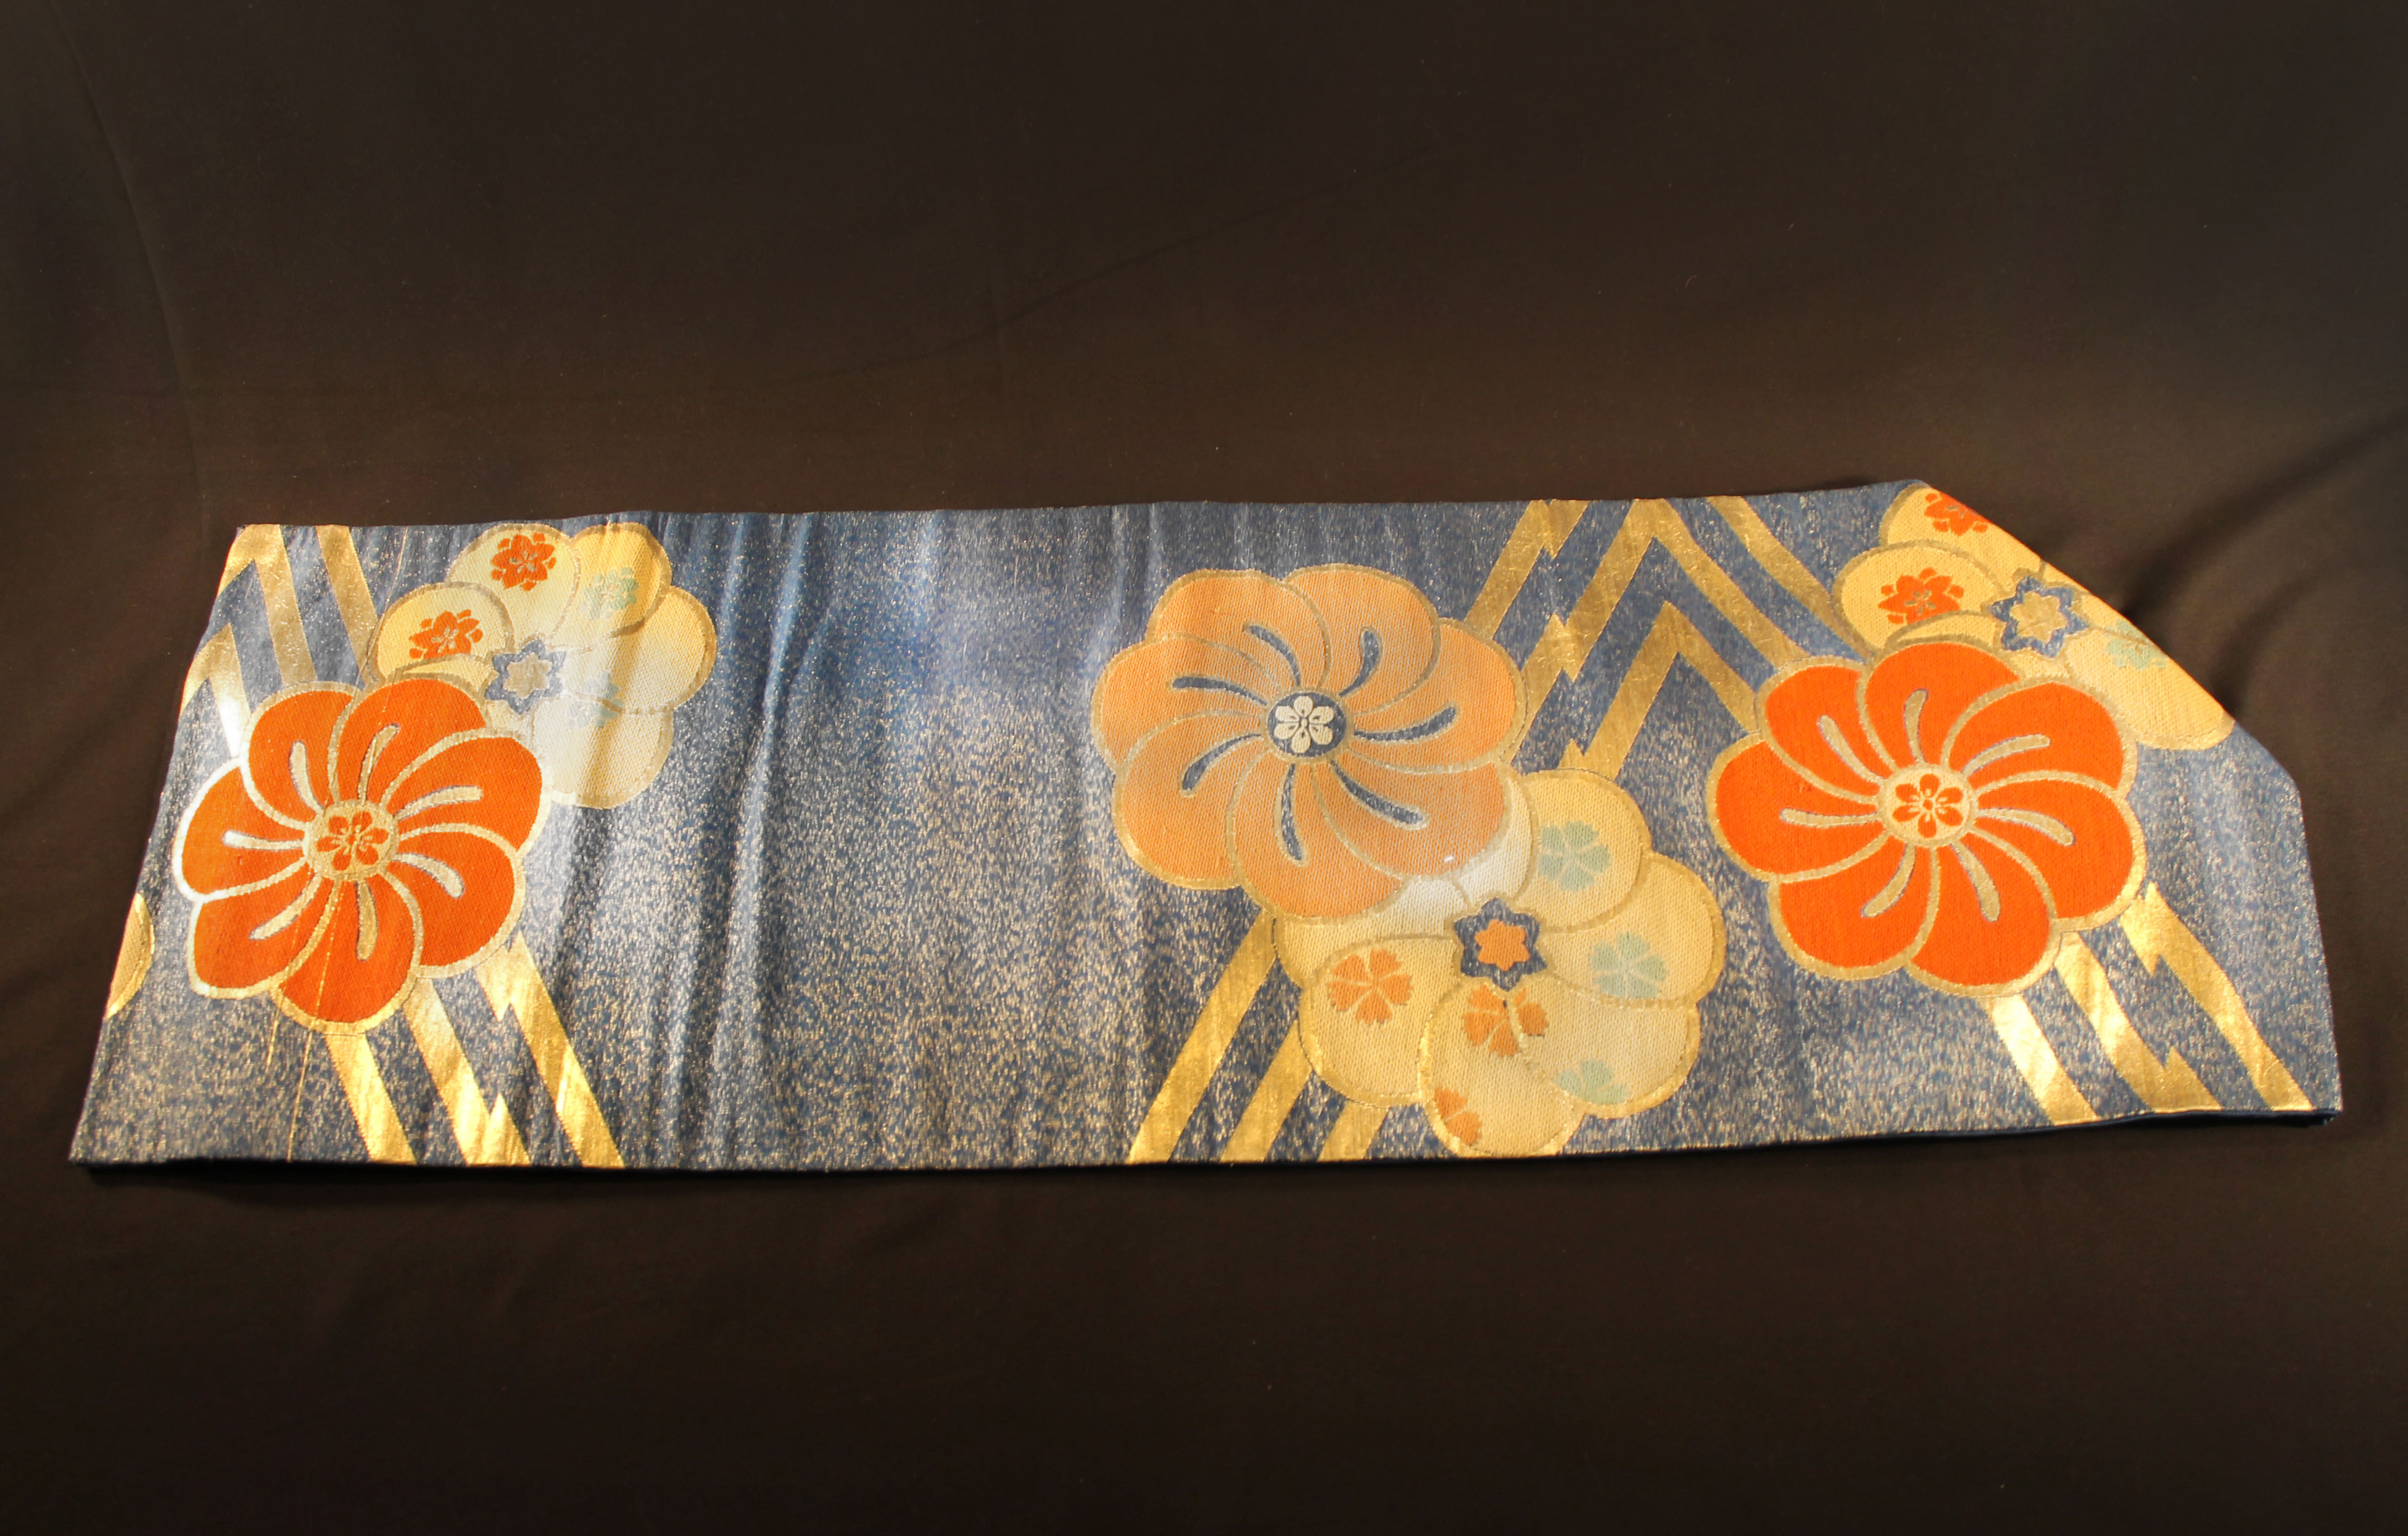  Blue fabric sash with gold and orange flower design. Gold threads are woven into the front blue fabric.